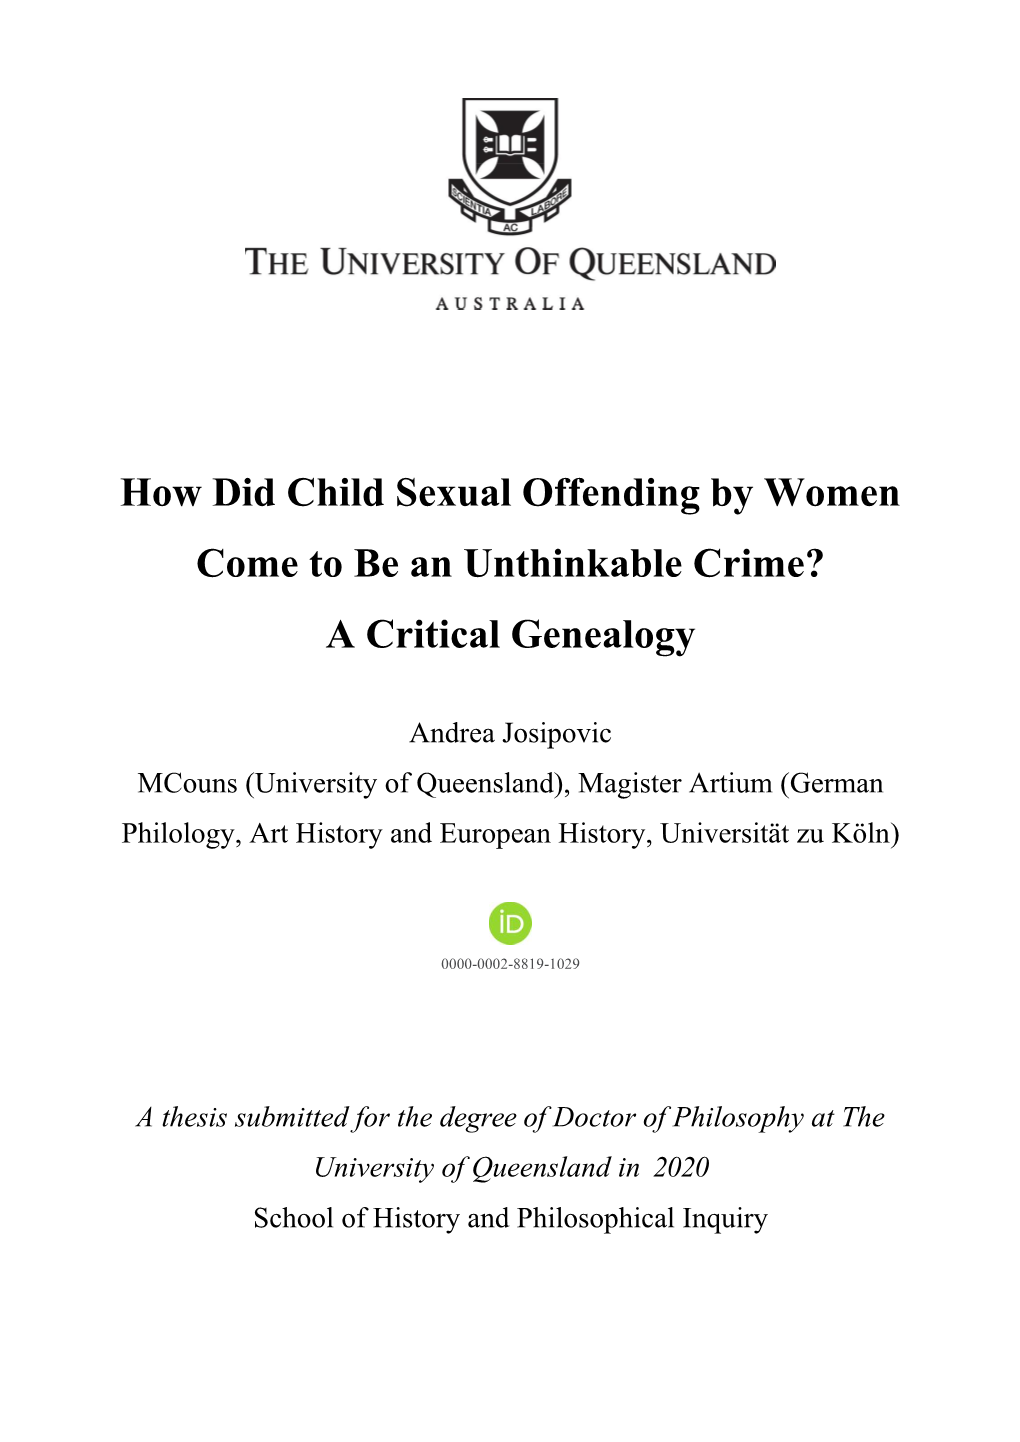 How Did Child Sexual Offending by Women Come to Be an Unthinkable Crime? a Critical Genealogy